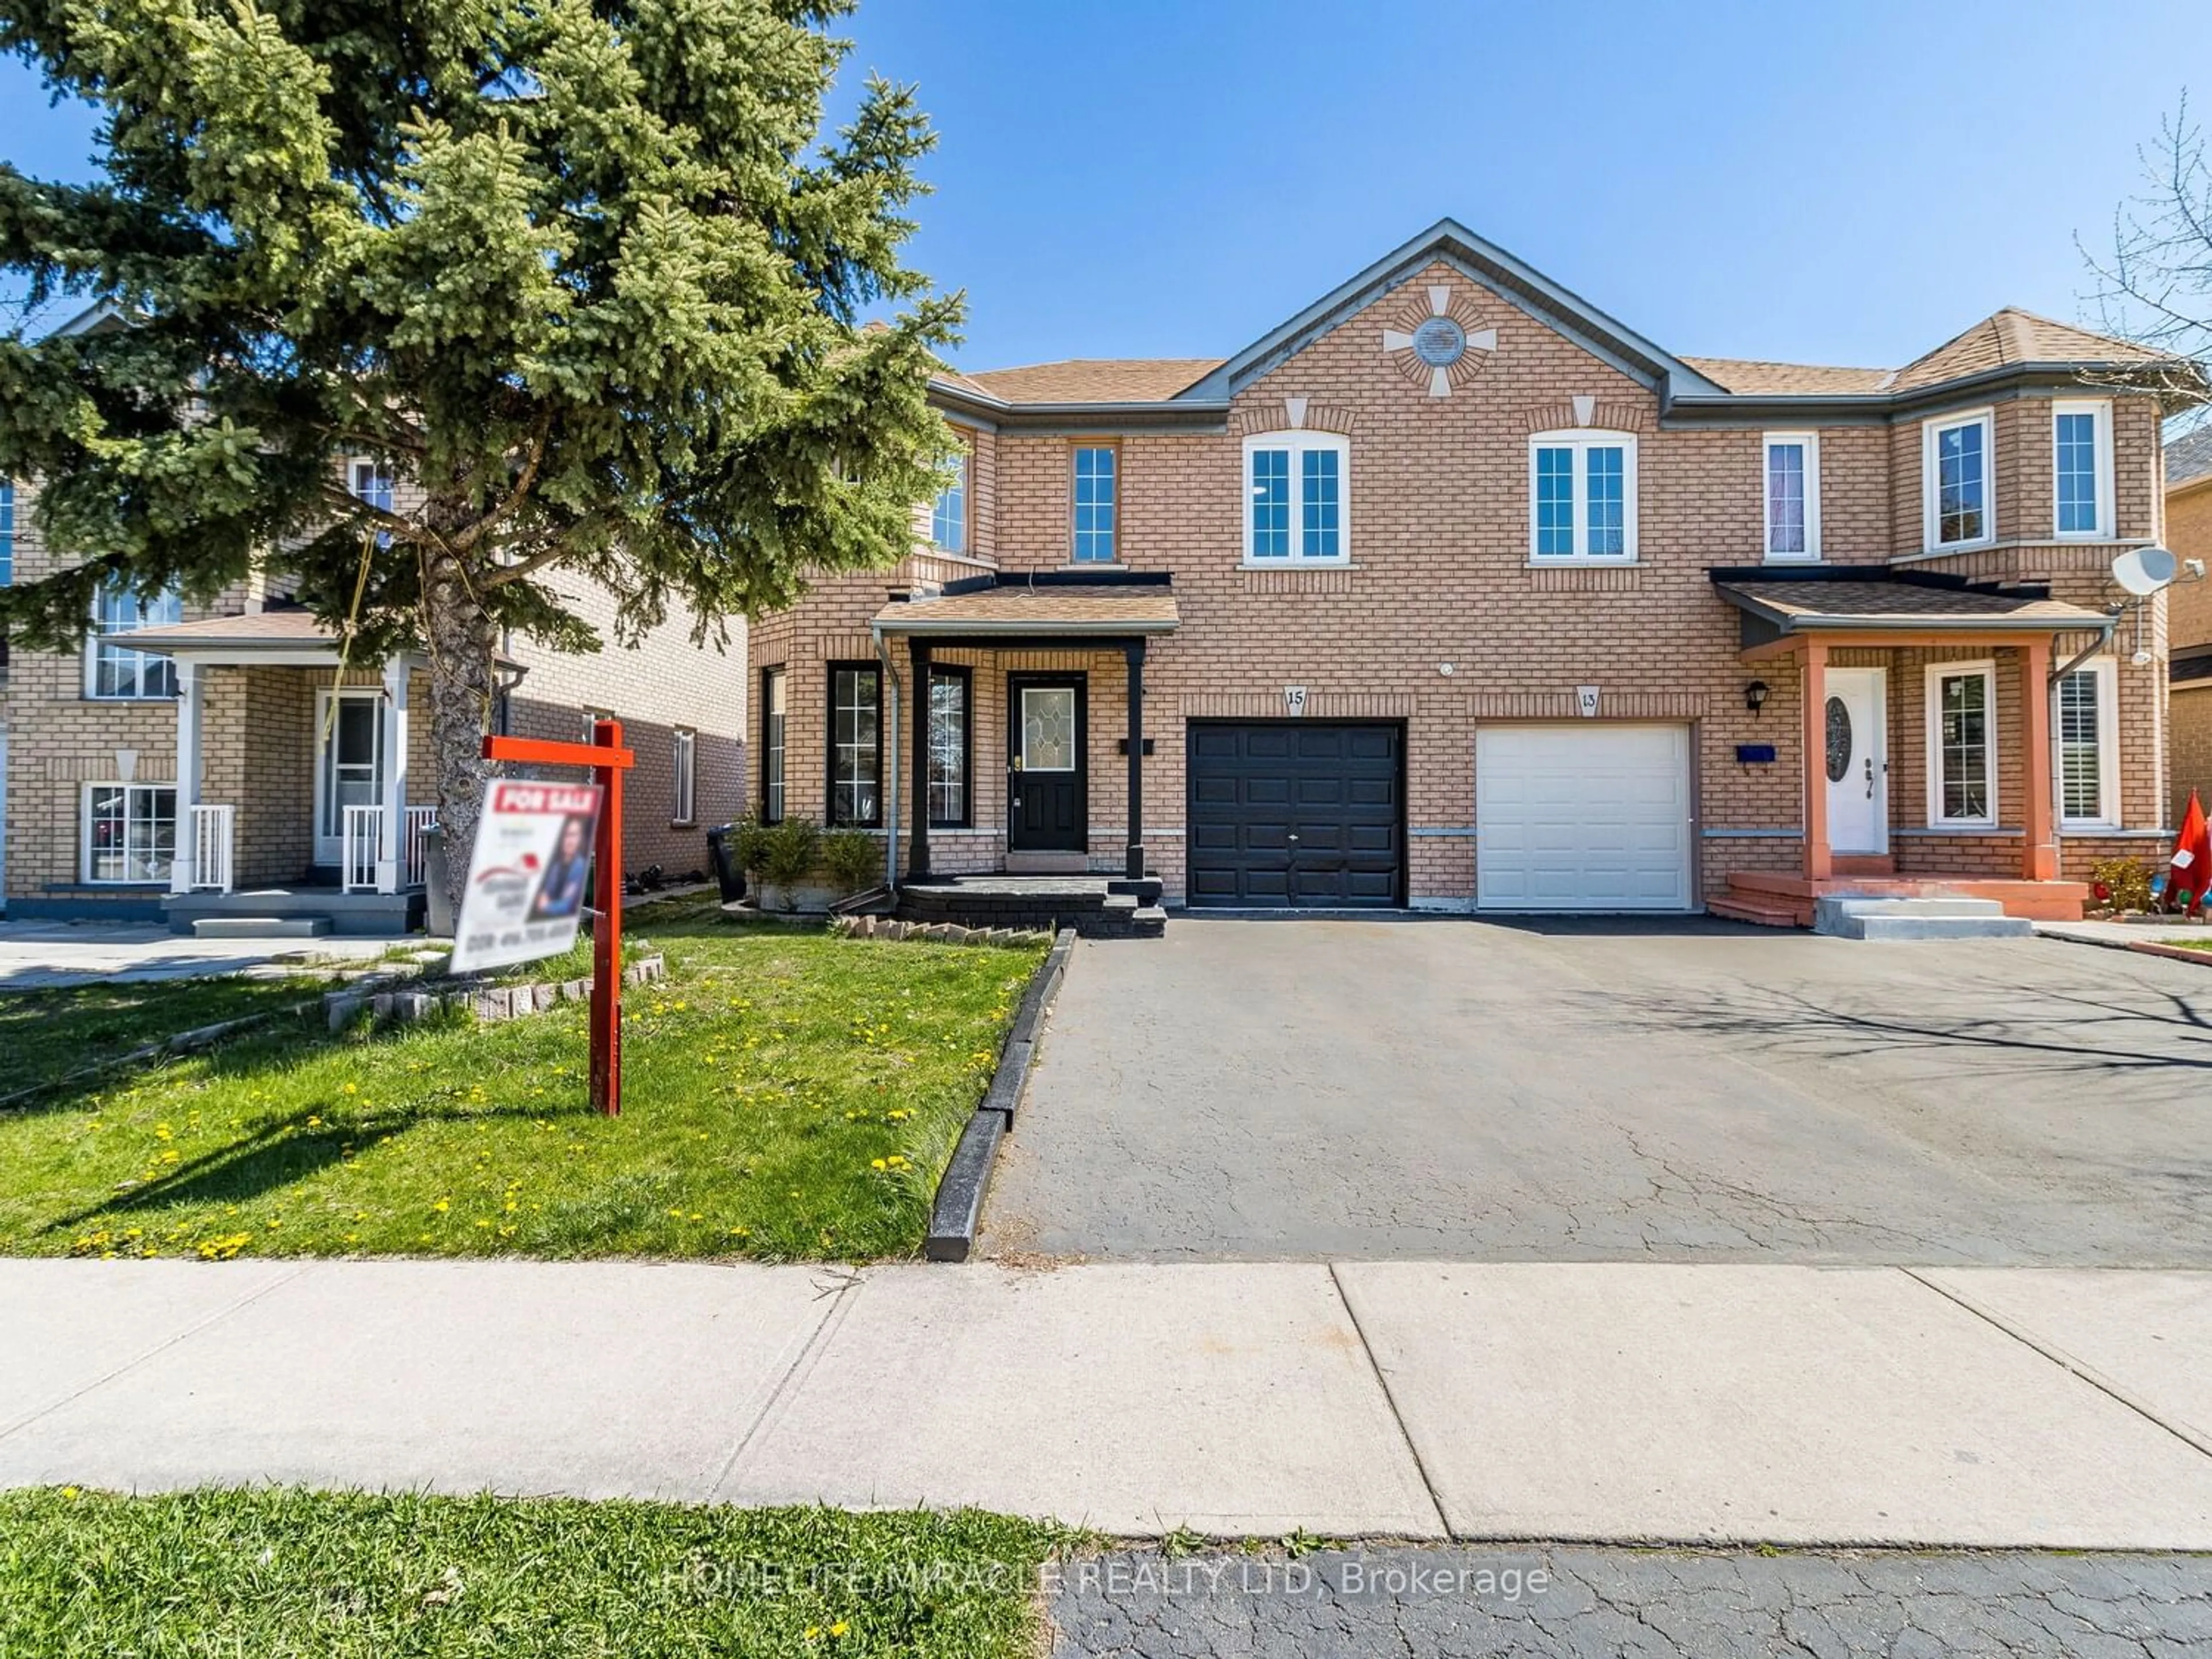 Frontside or backside of a home for 15 Flatlands Way, Brampton Ontario L6R 2B5